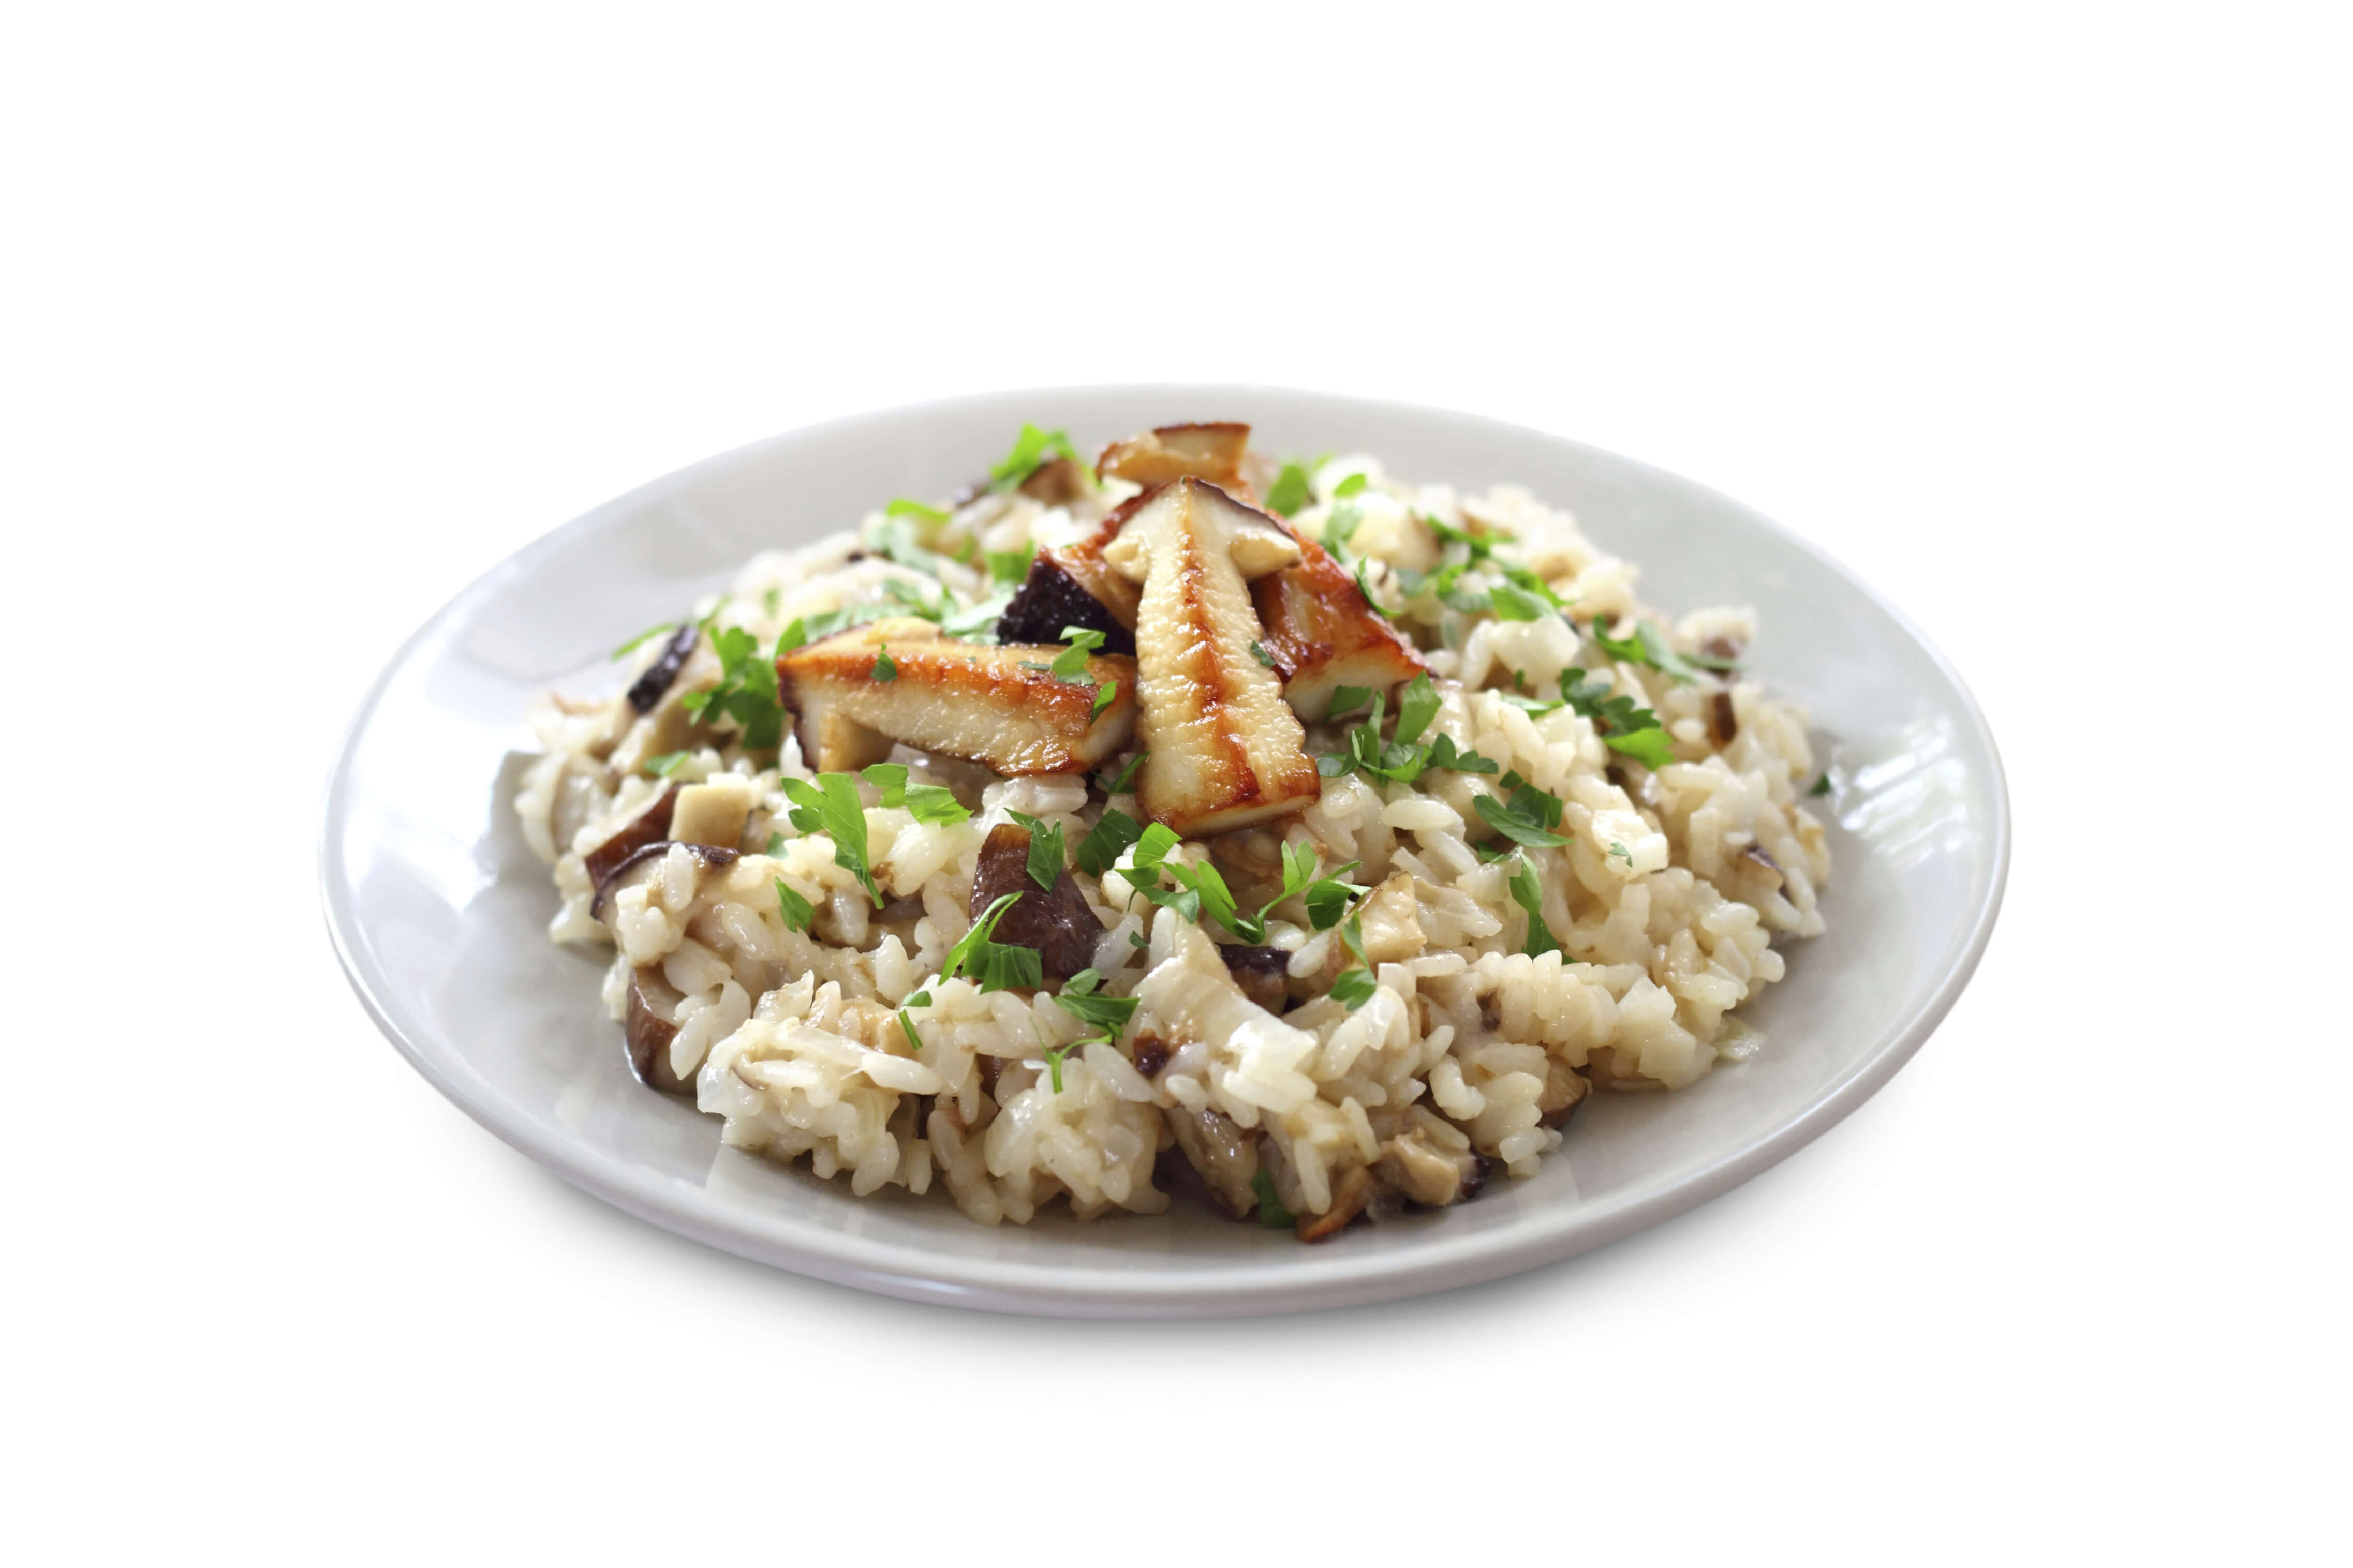 traditional risotto can take up to an house to make. with a pressure cooker, it can take 10 minutes.